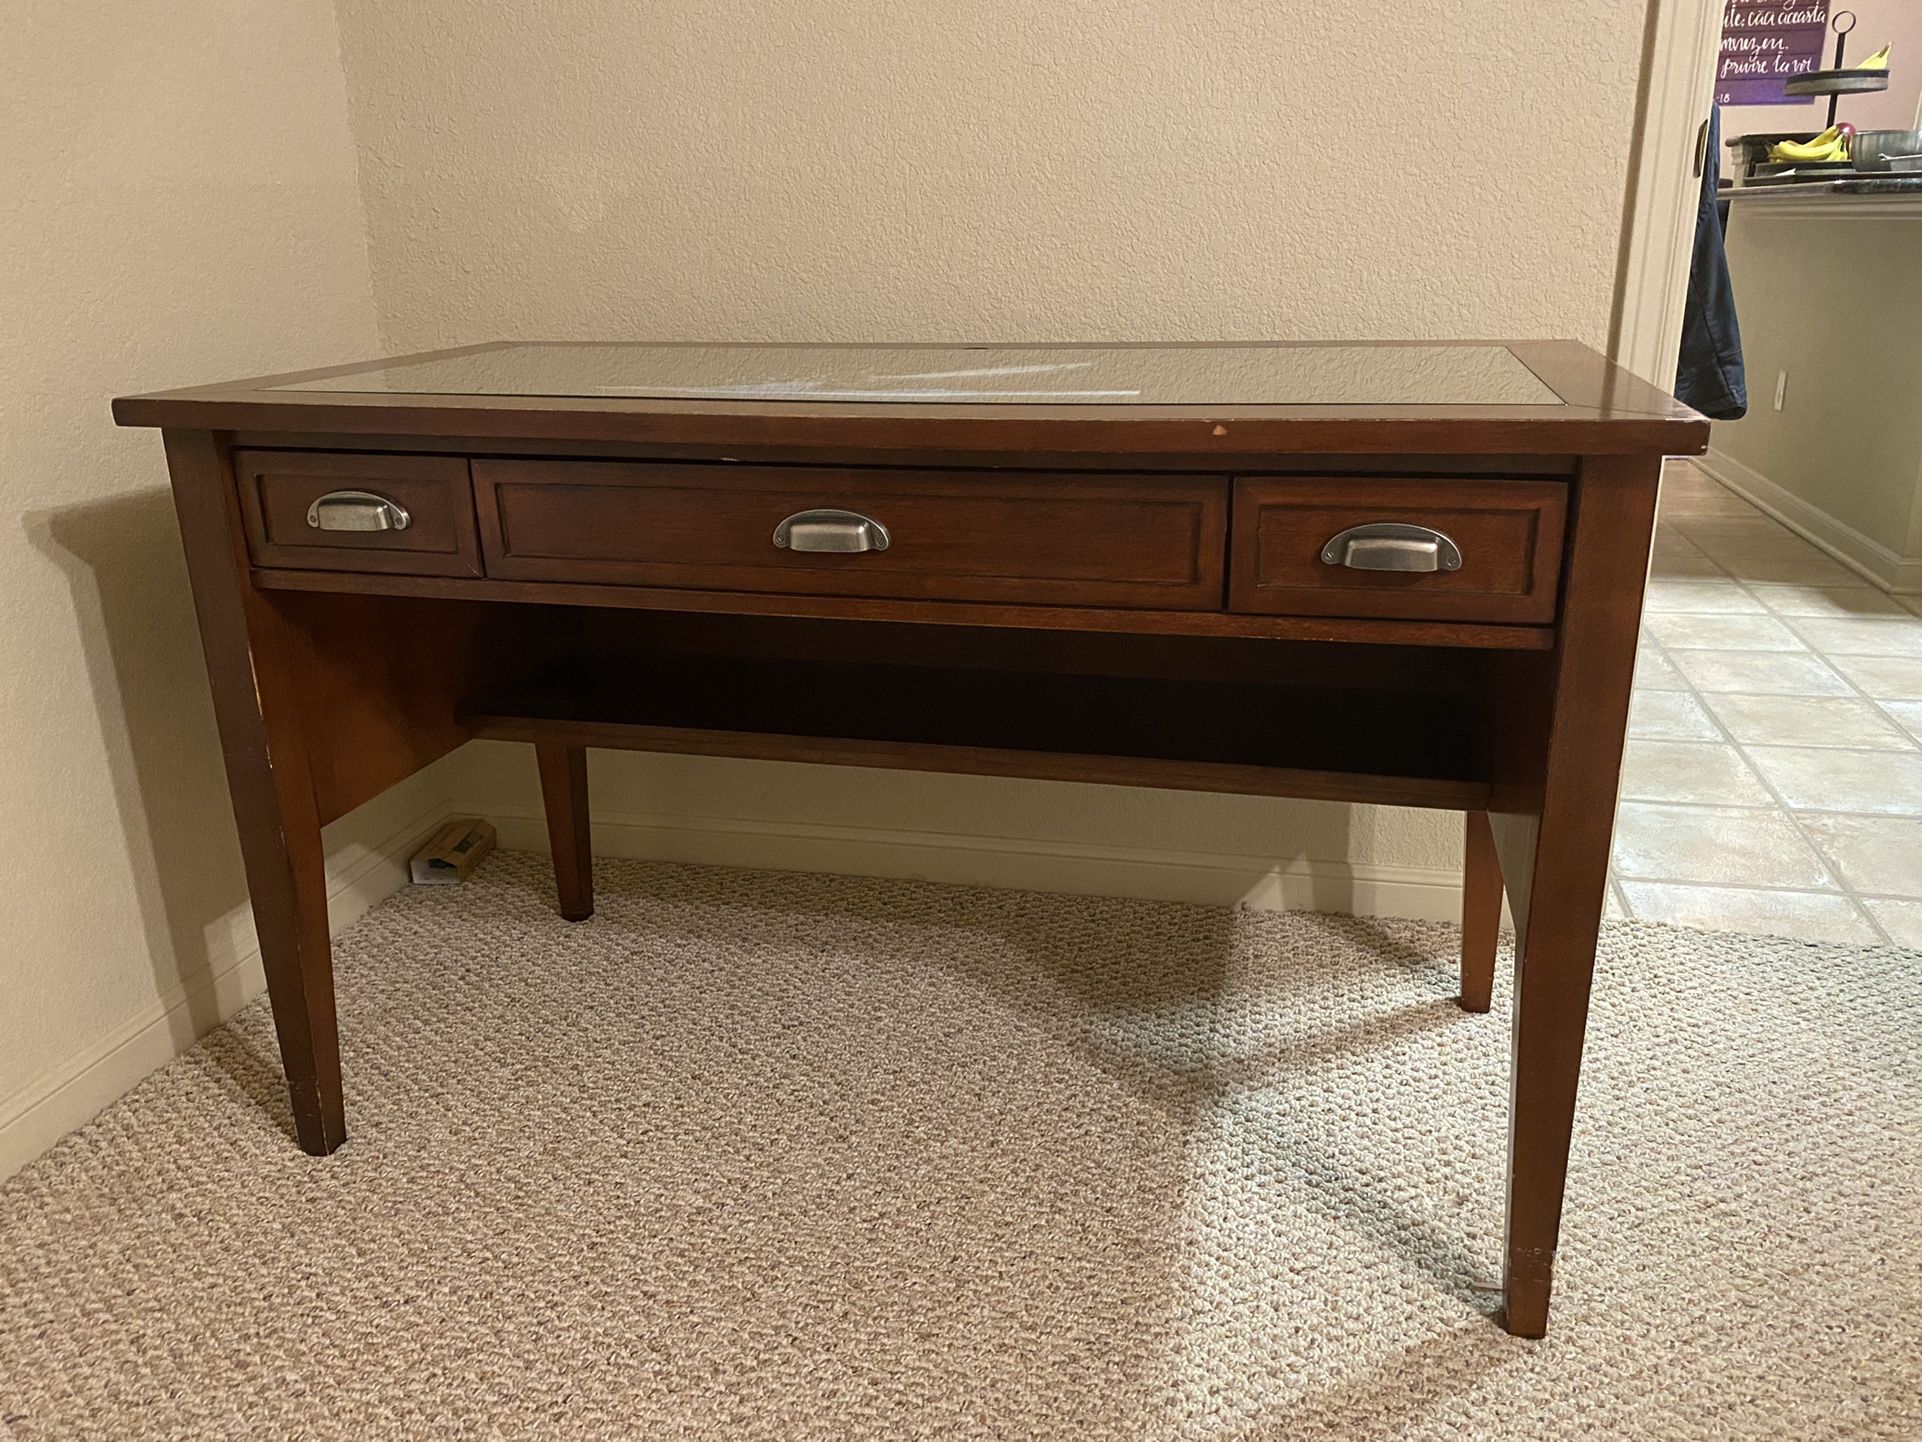 Solid wood computer desk/table w/glass top